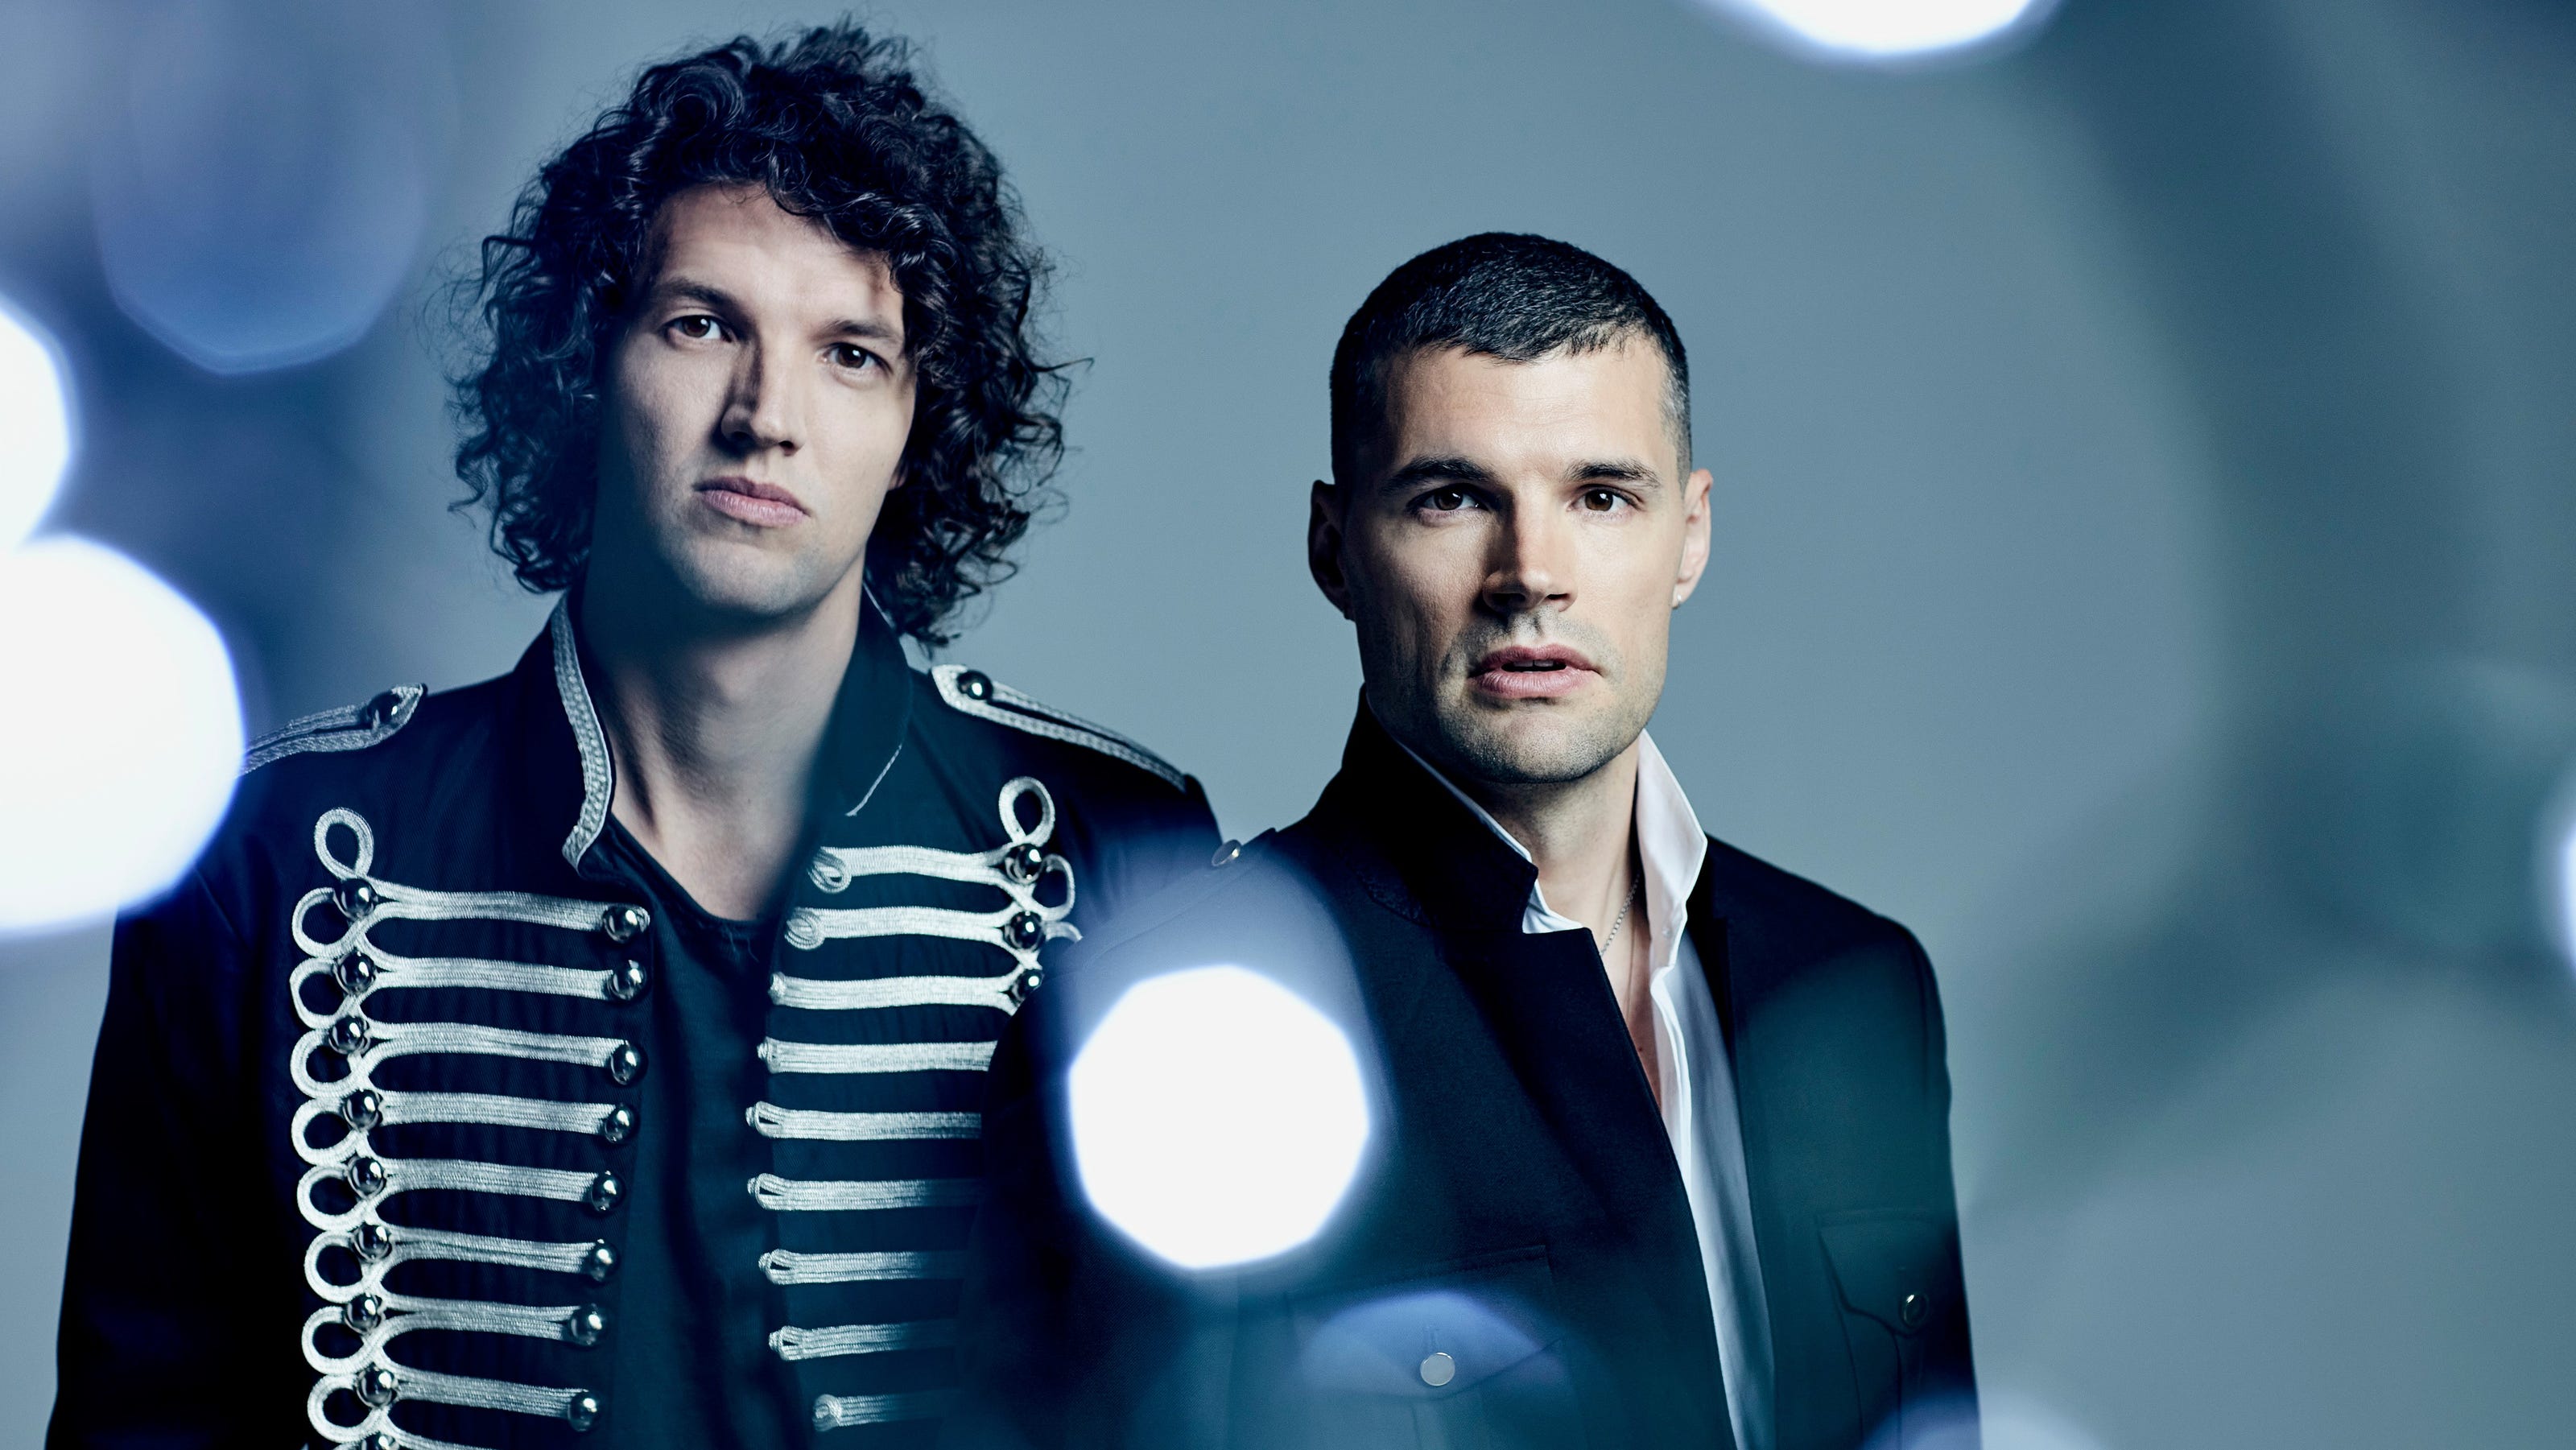 For King & Country on 'getting back to the heart of Christmas'